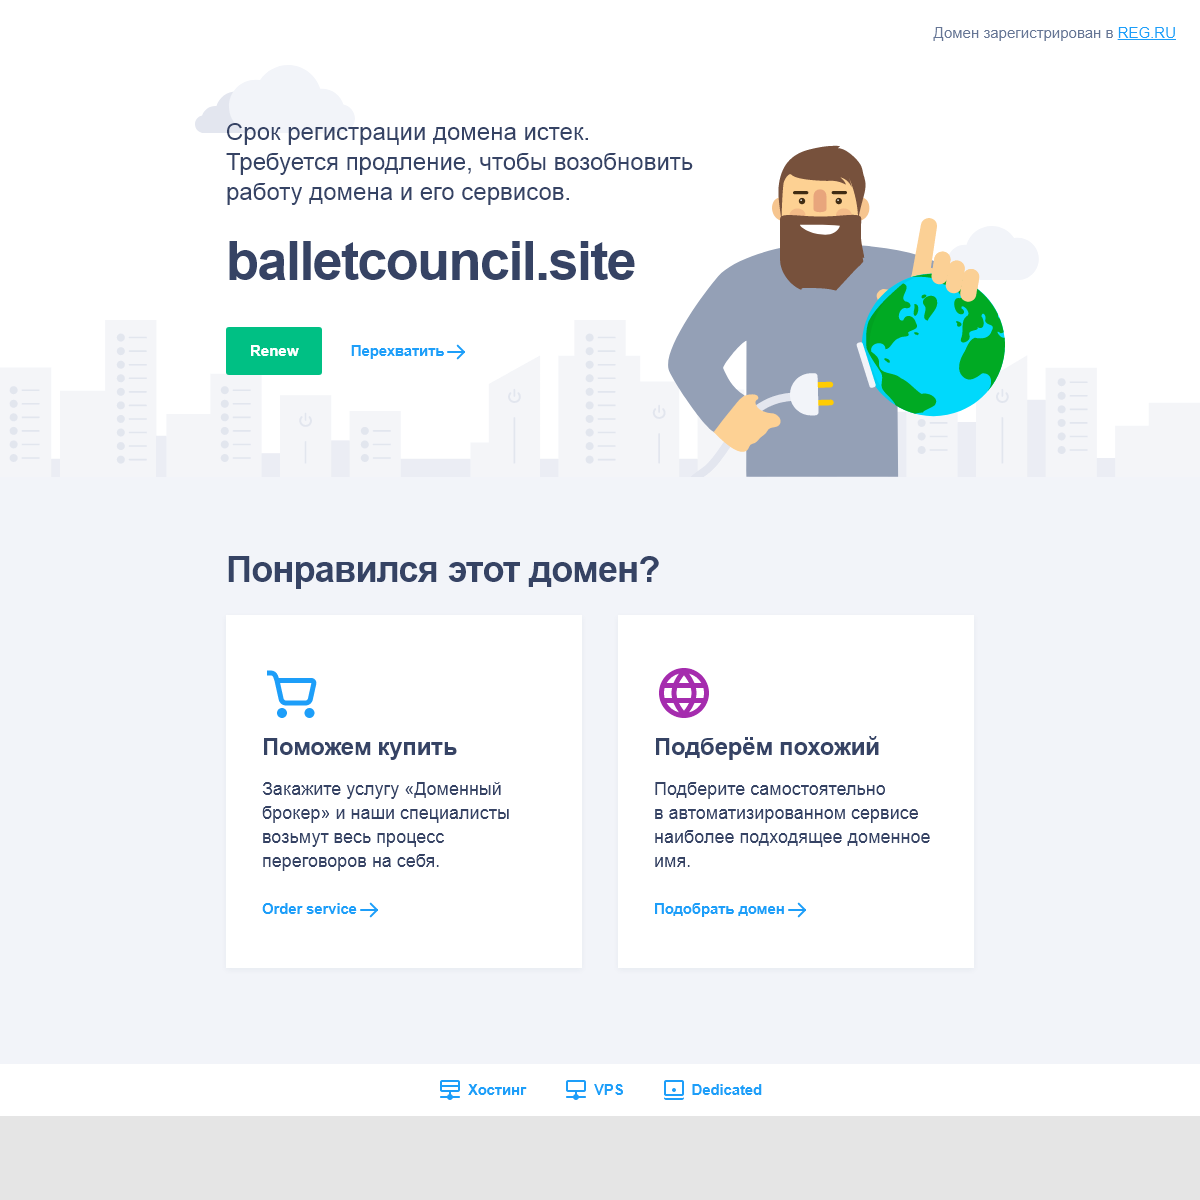 A complete backup of balletcouncil.site